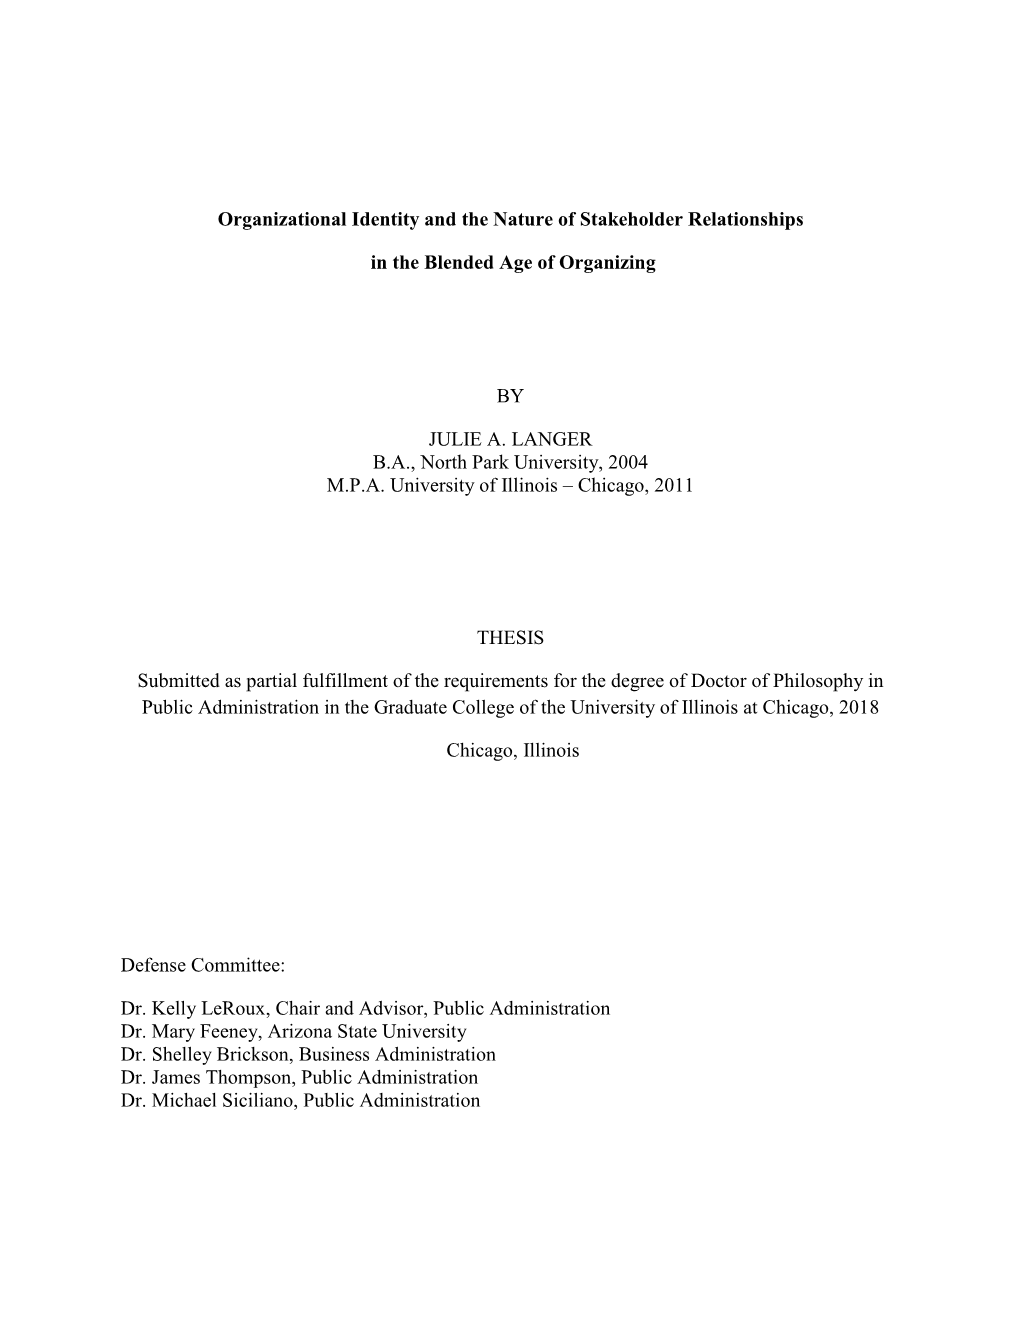 Organizational Identity and the Nature of Stakeholder Relationships in the Blended Age of Organizing by JULIE A. LANGER B.A., No